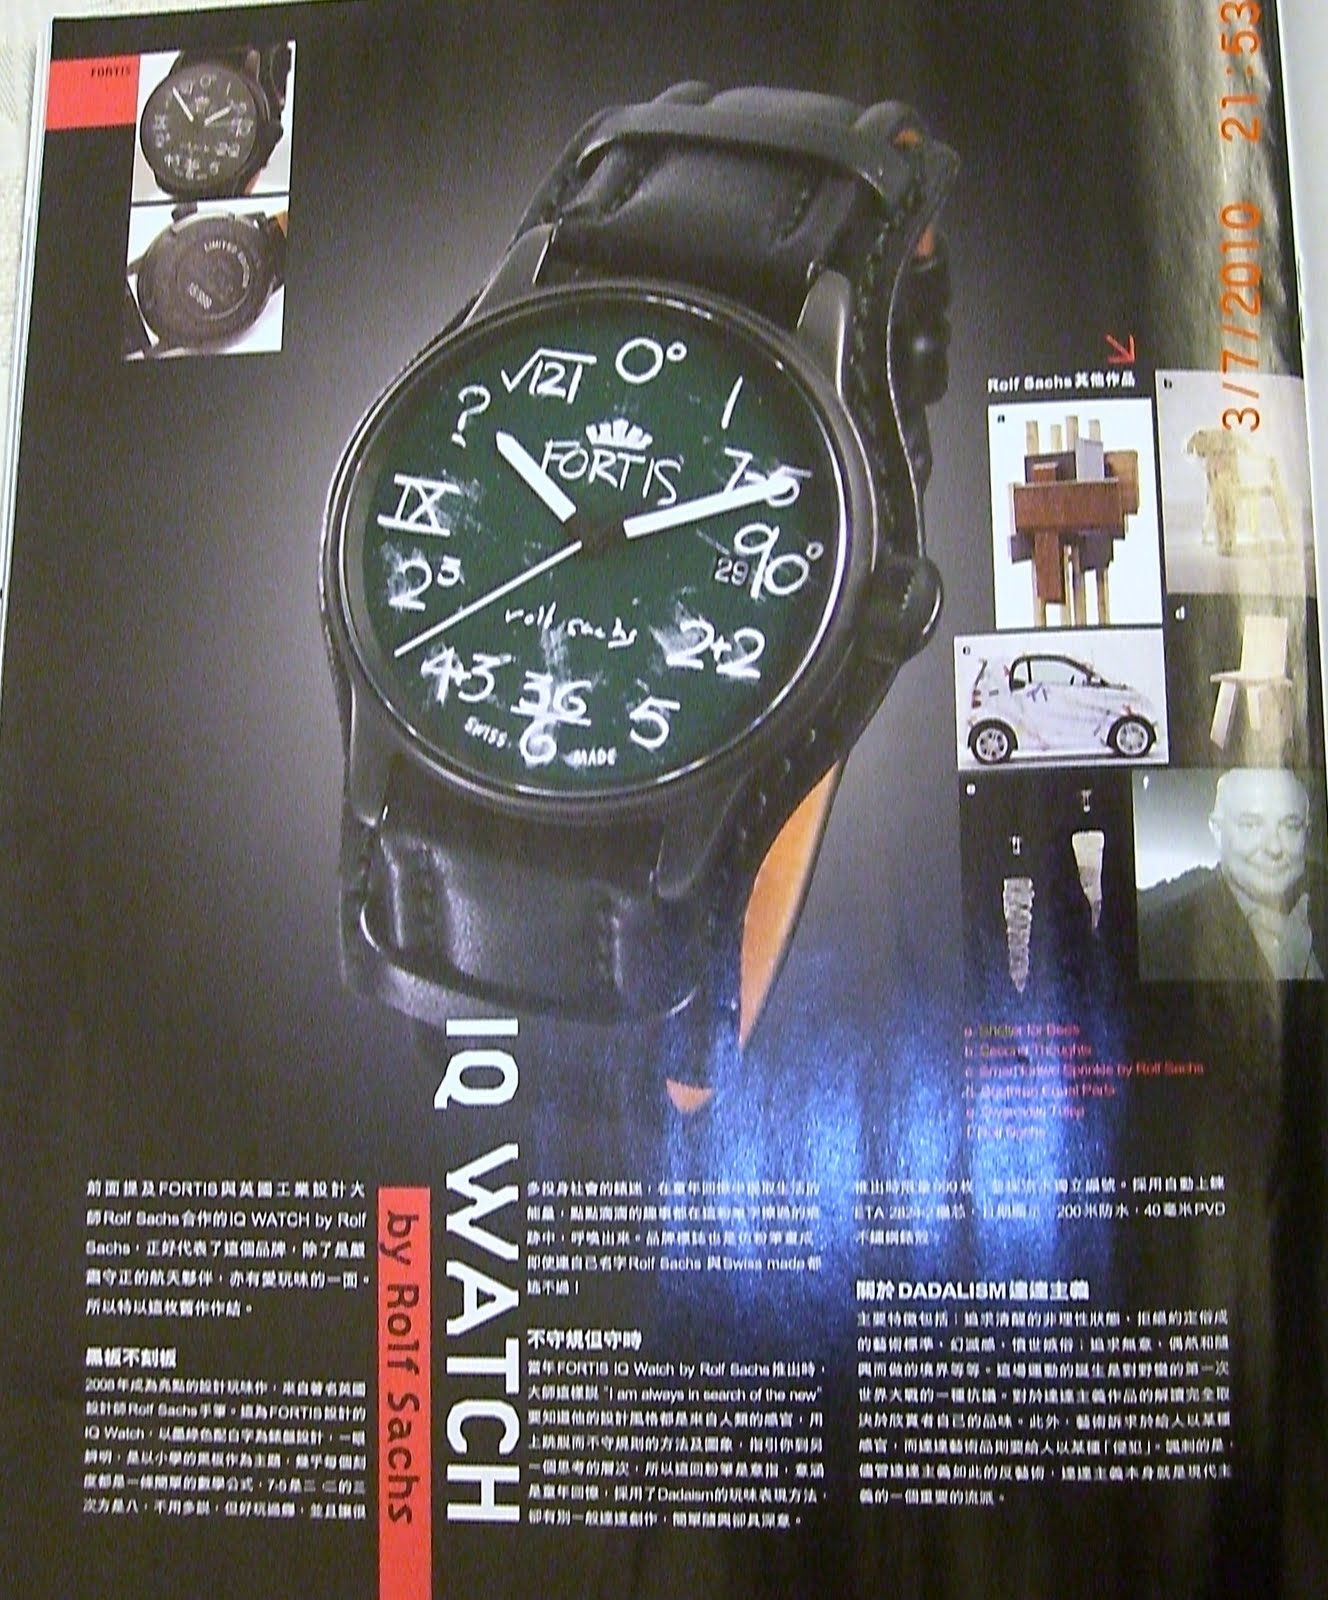 Vintage watch experience 古董手錶: Fortis IQ watch 2008